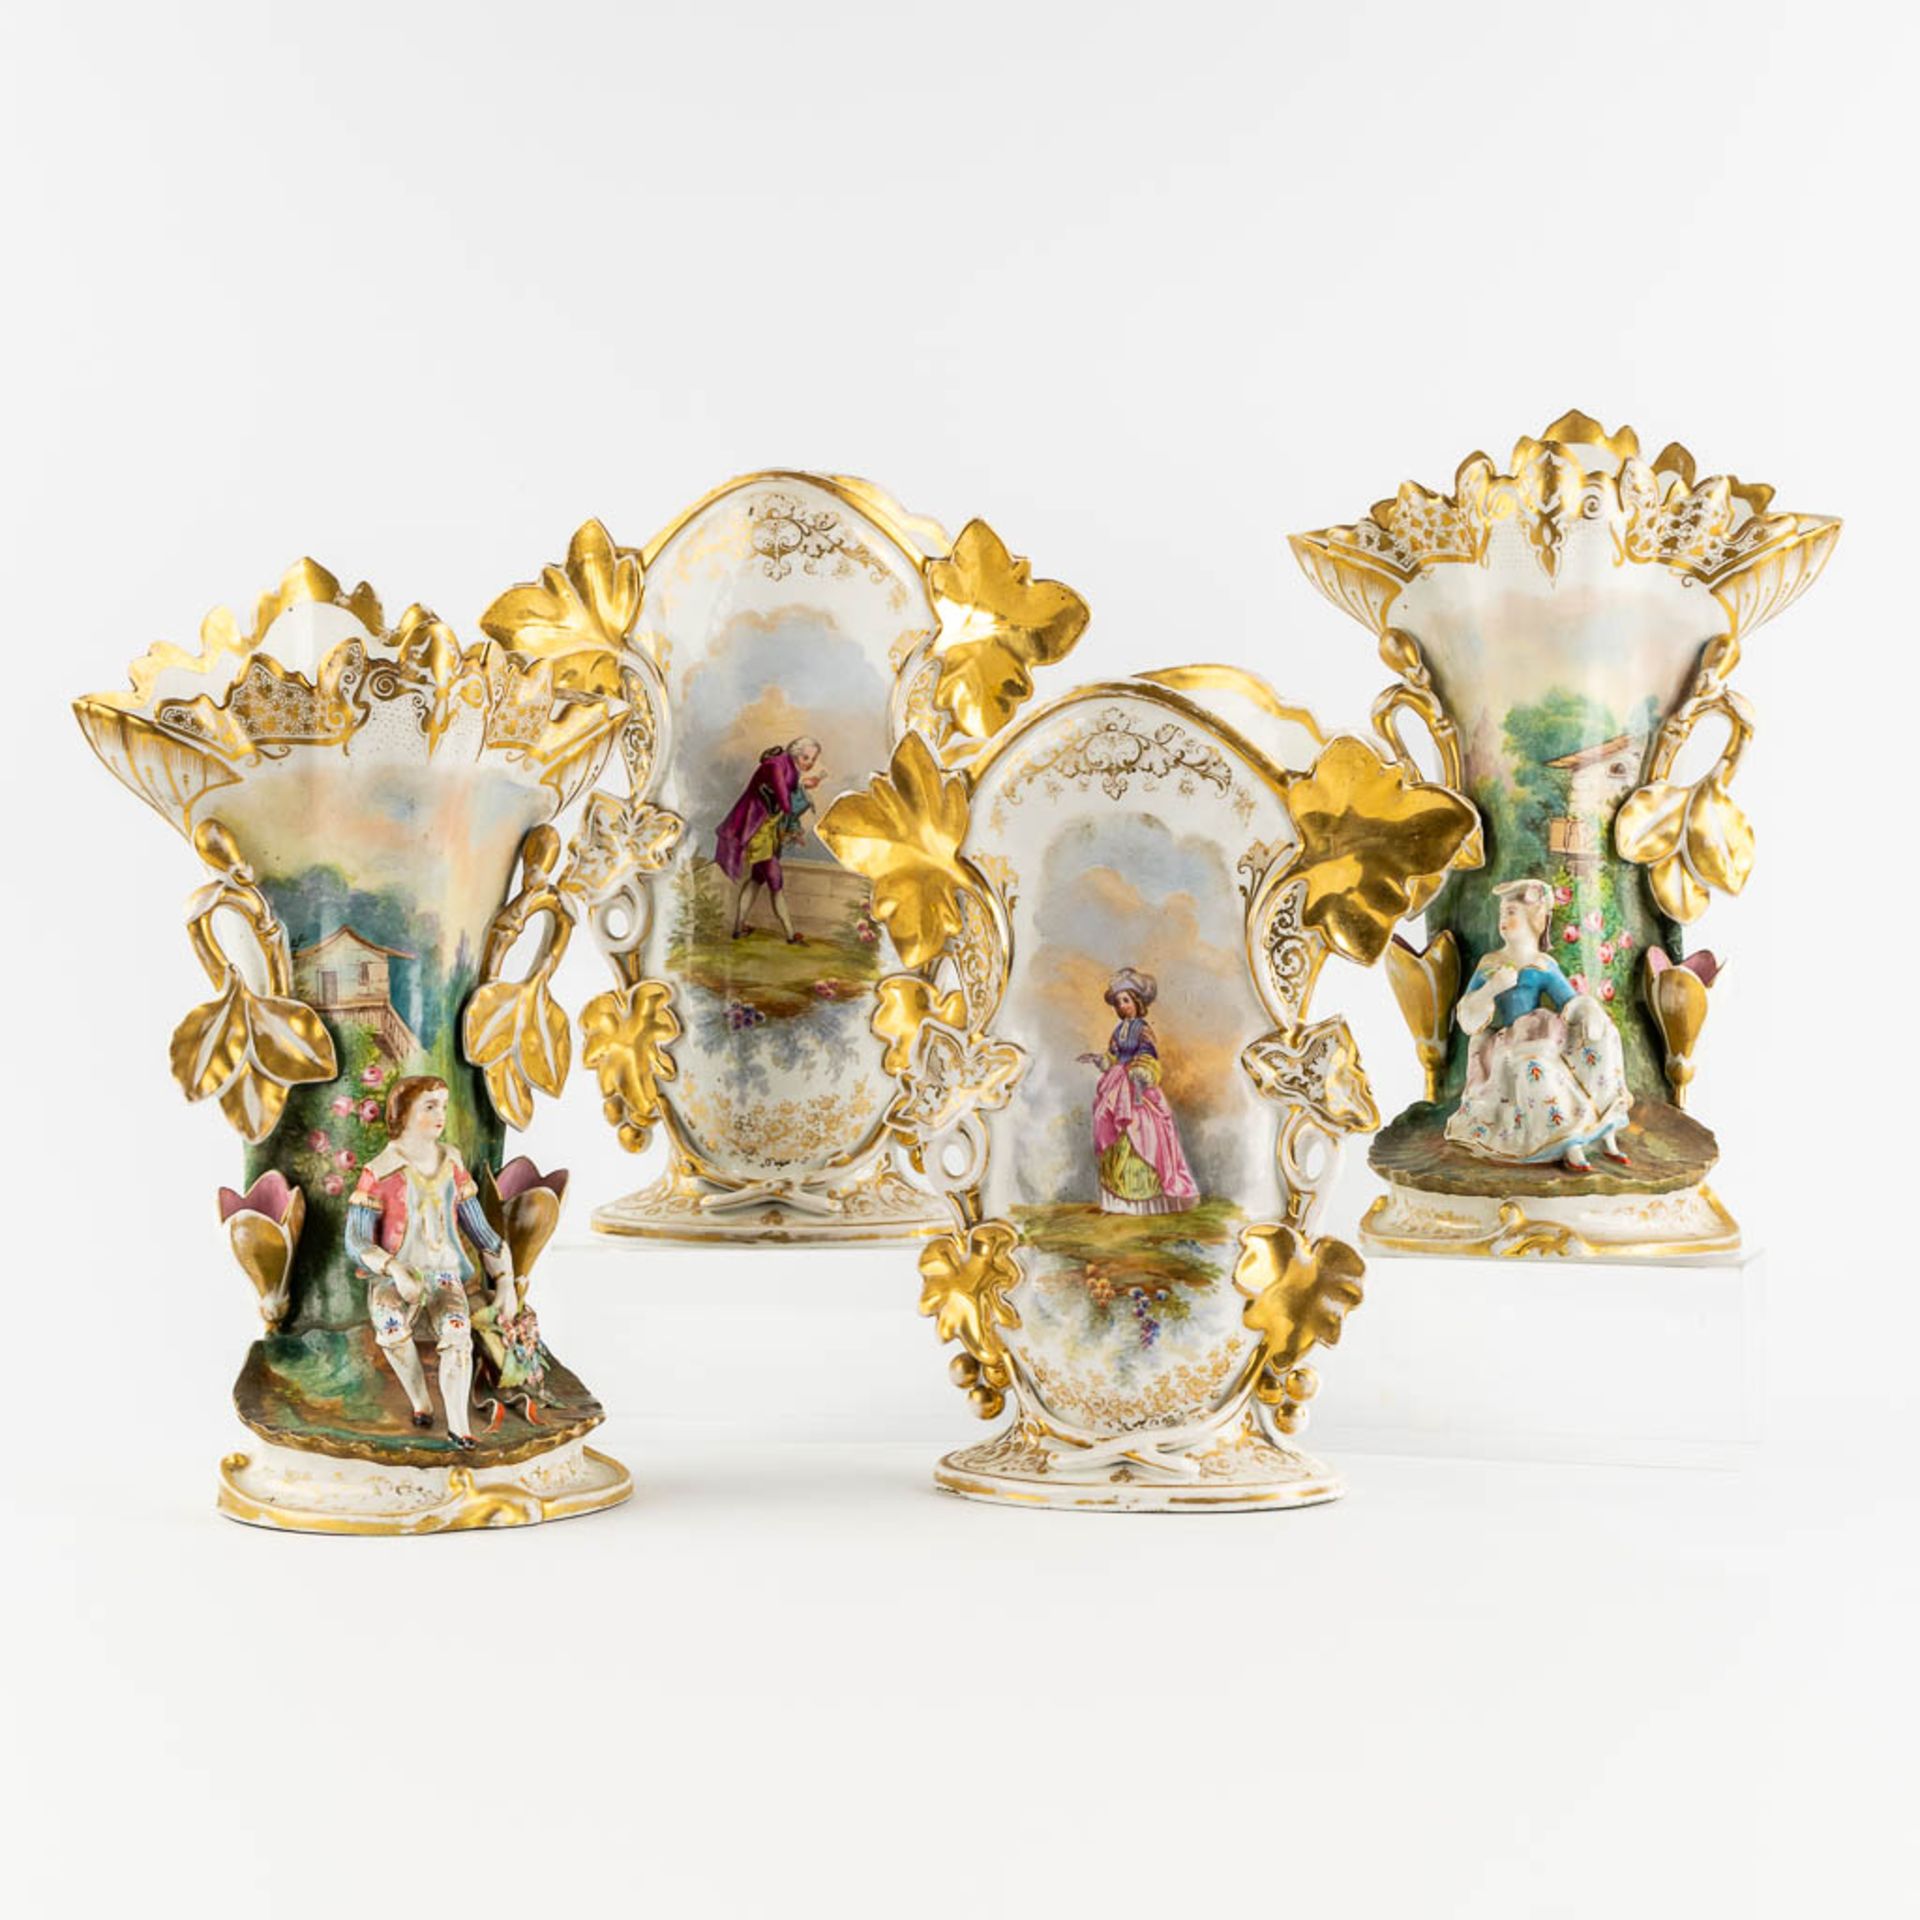 Two pair of Vieux Bruxelles vases, decorated with flowers and figurines. (L:20 x W:26 x H:39 cm)